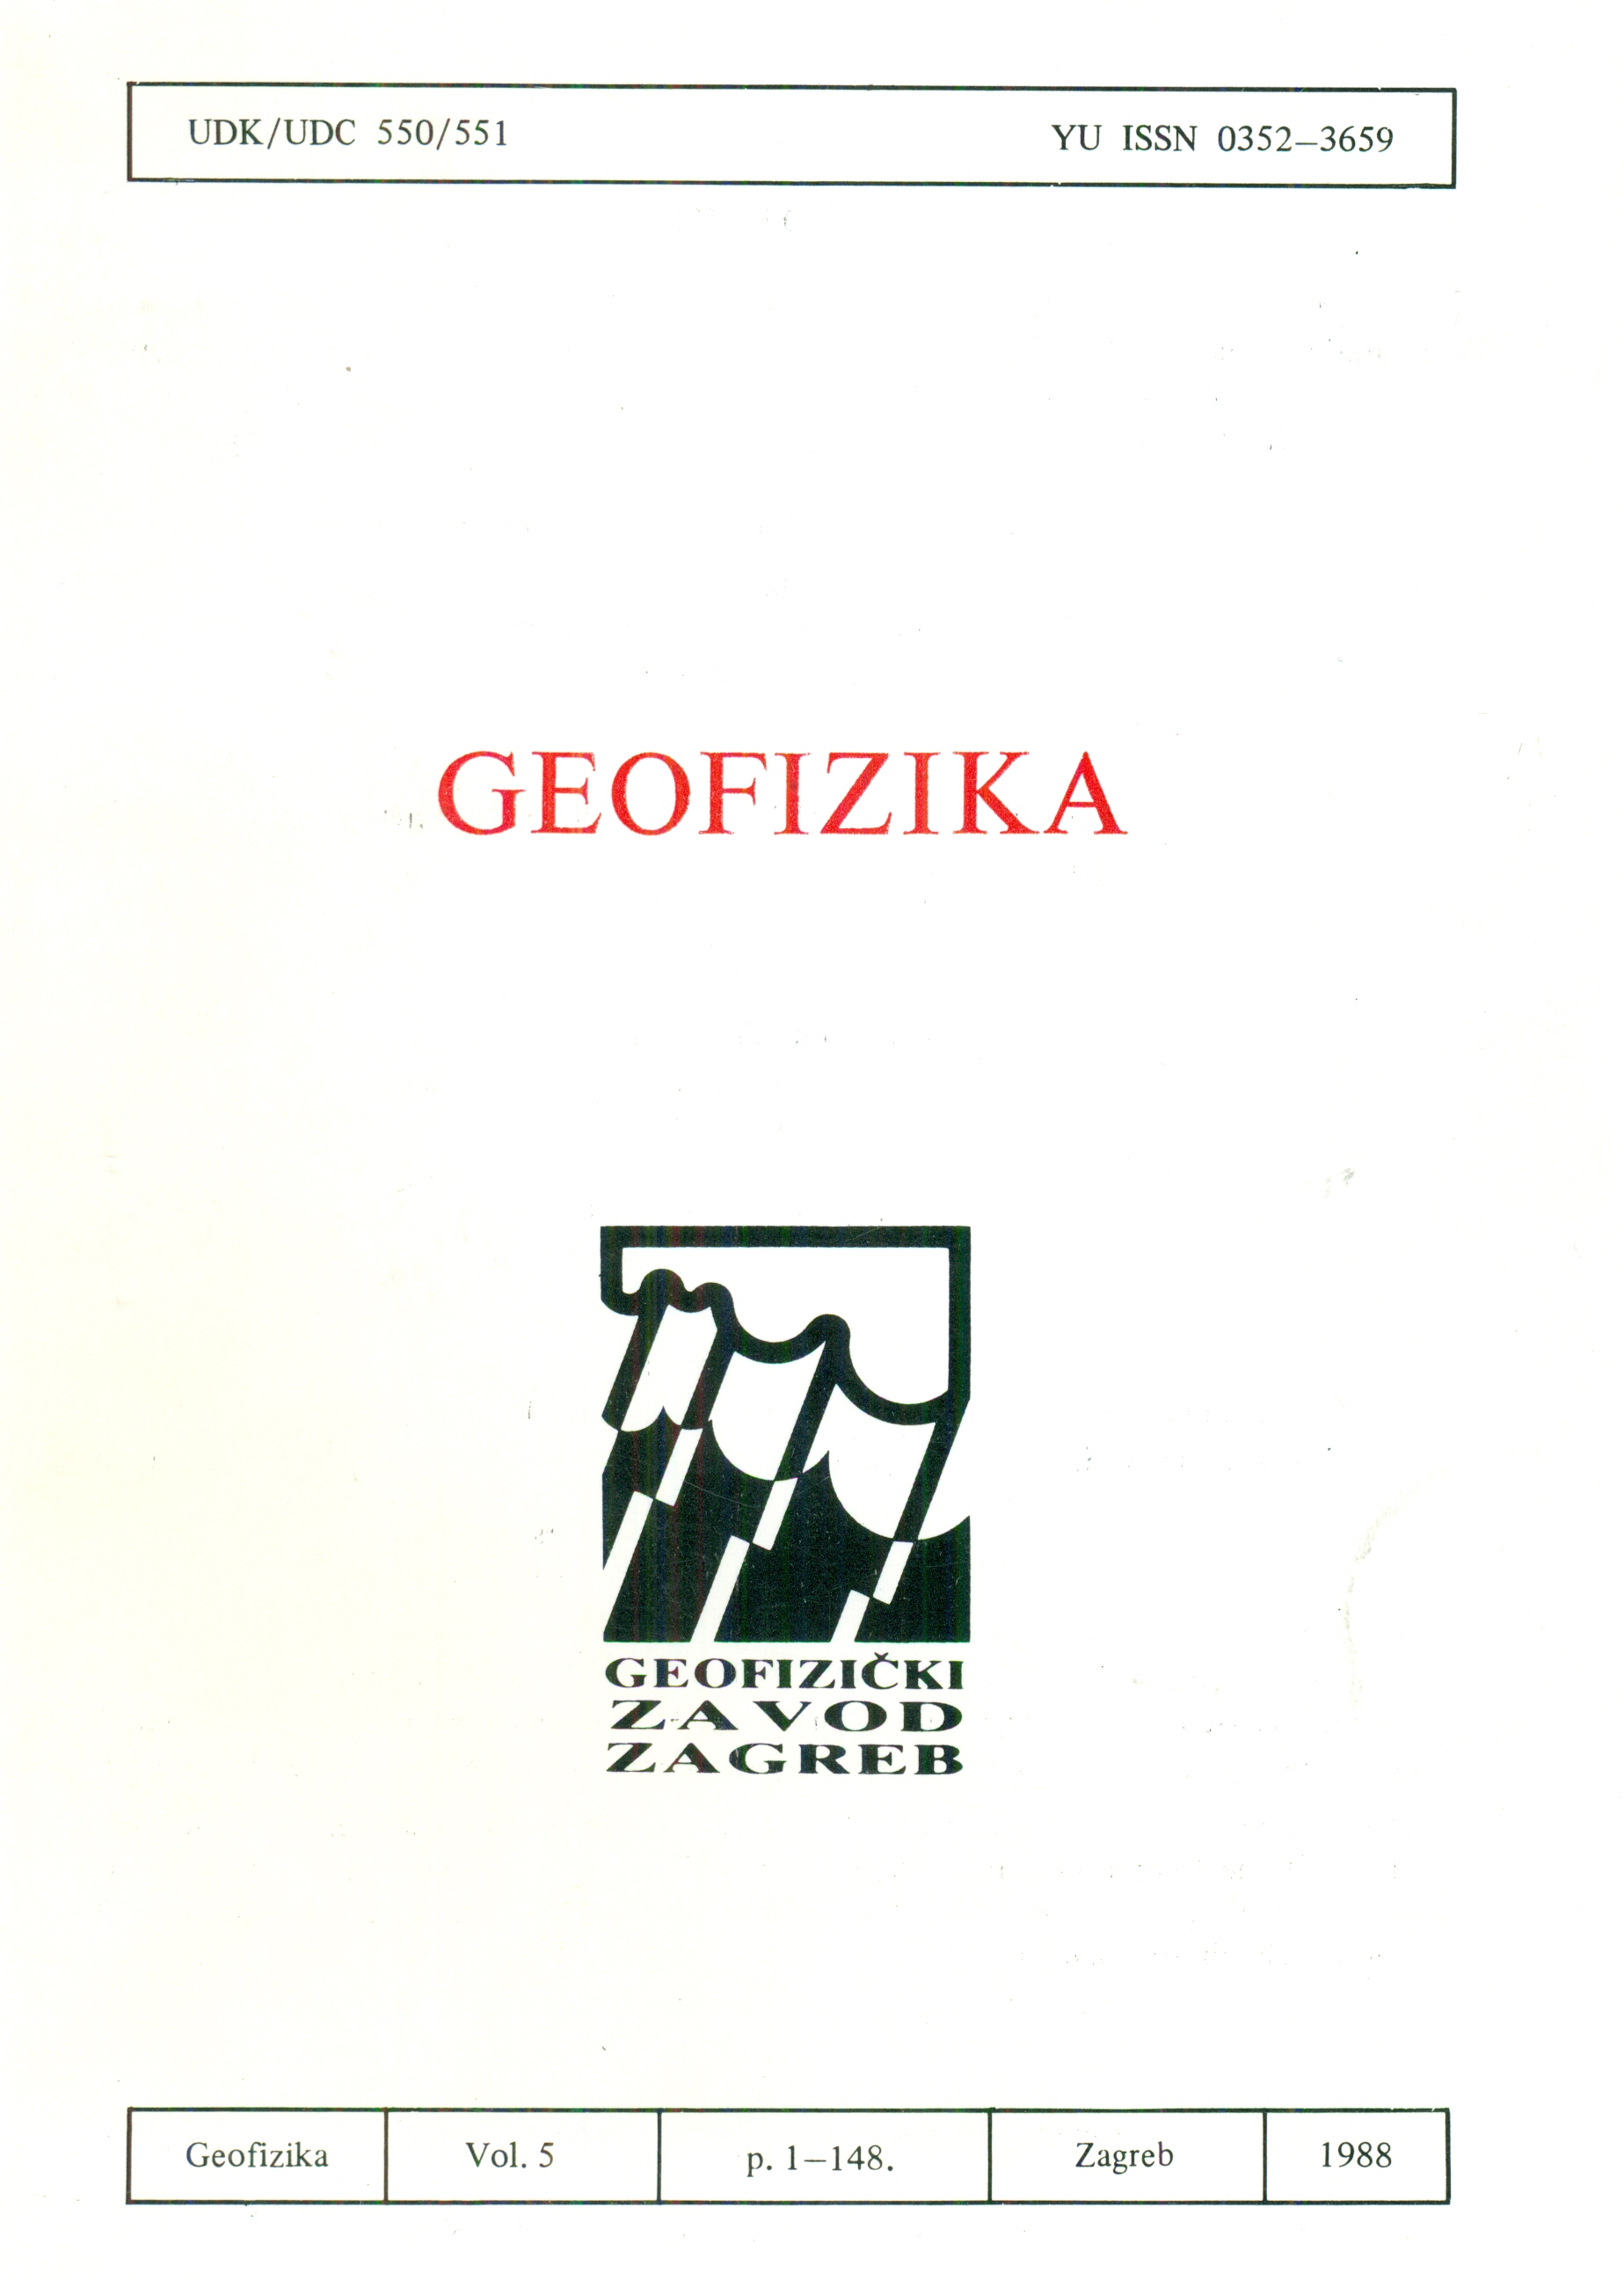 					View Vol. 5 (1988): Symposium "Observations and Modelling in Geophysics", Zagreb, June 11-13 1986  - part 2
				